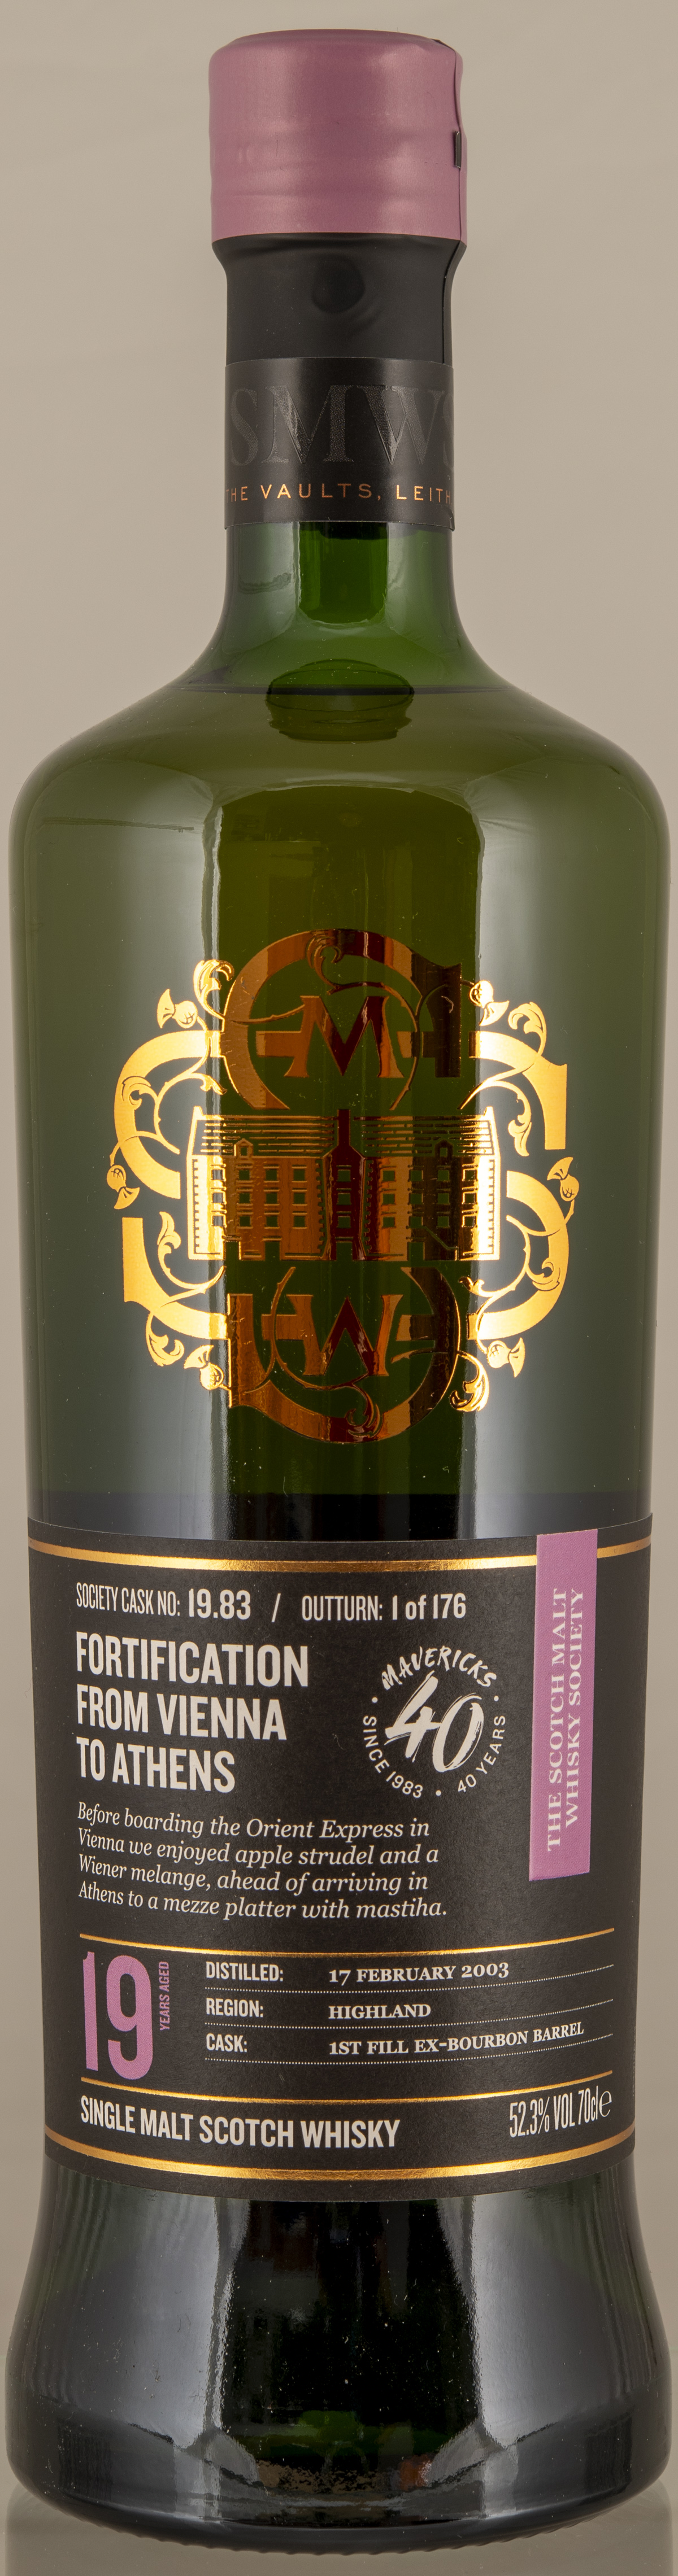 Billede: D85_8352 - SMWS 19.83 - Fortification from Vienna to Athens - bottle front .jpg